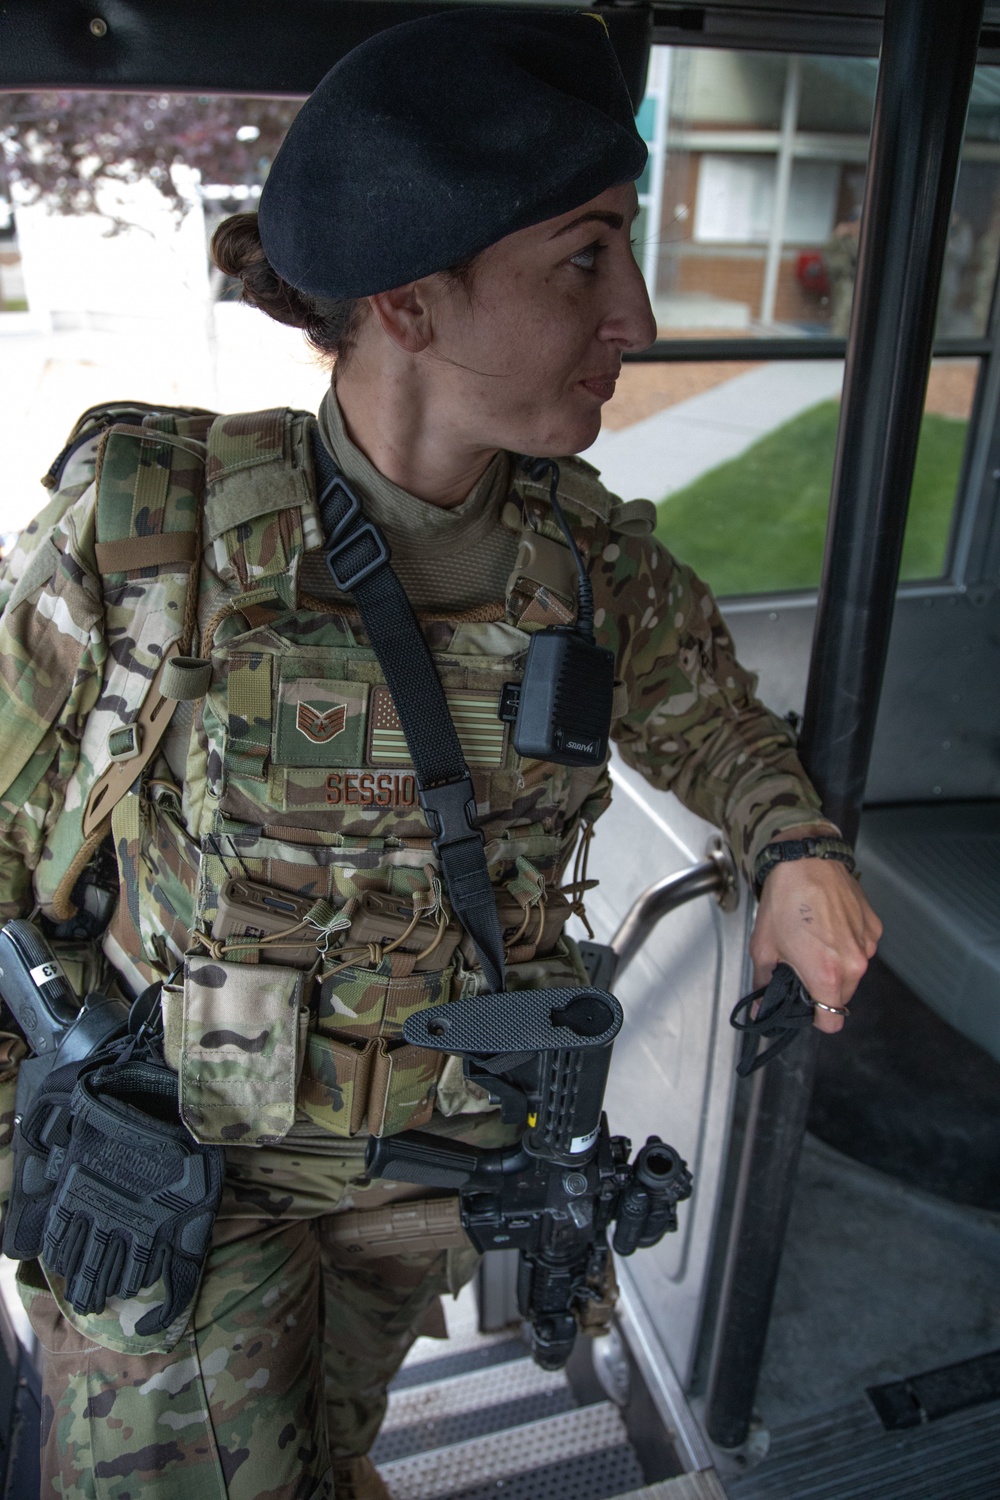 Airman of the 151 Security Forces Squadron respond to the call of thier Governor in a time of social crisis and rioting to protect citizens of Utah.